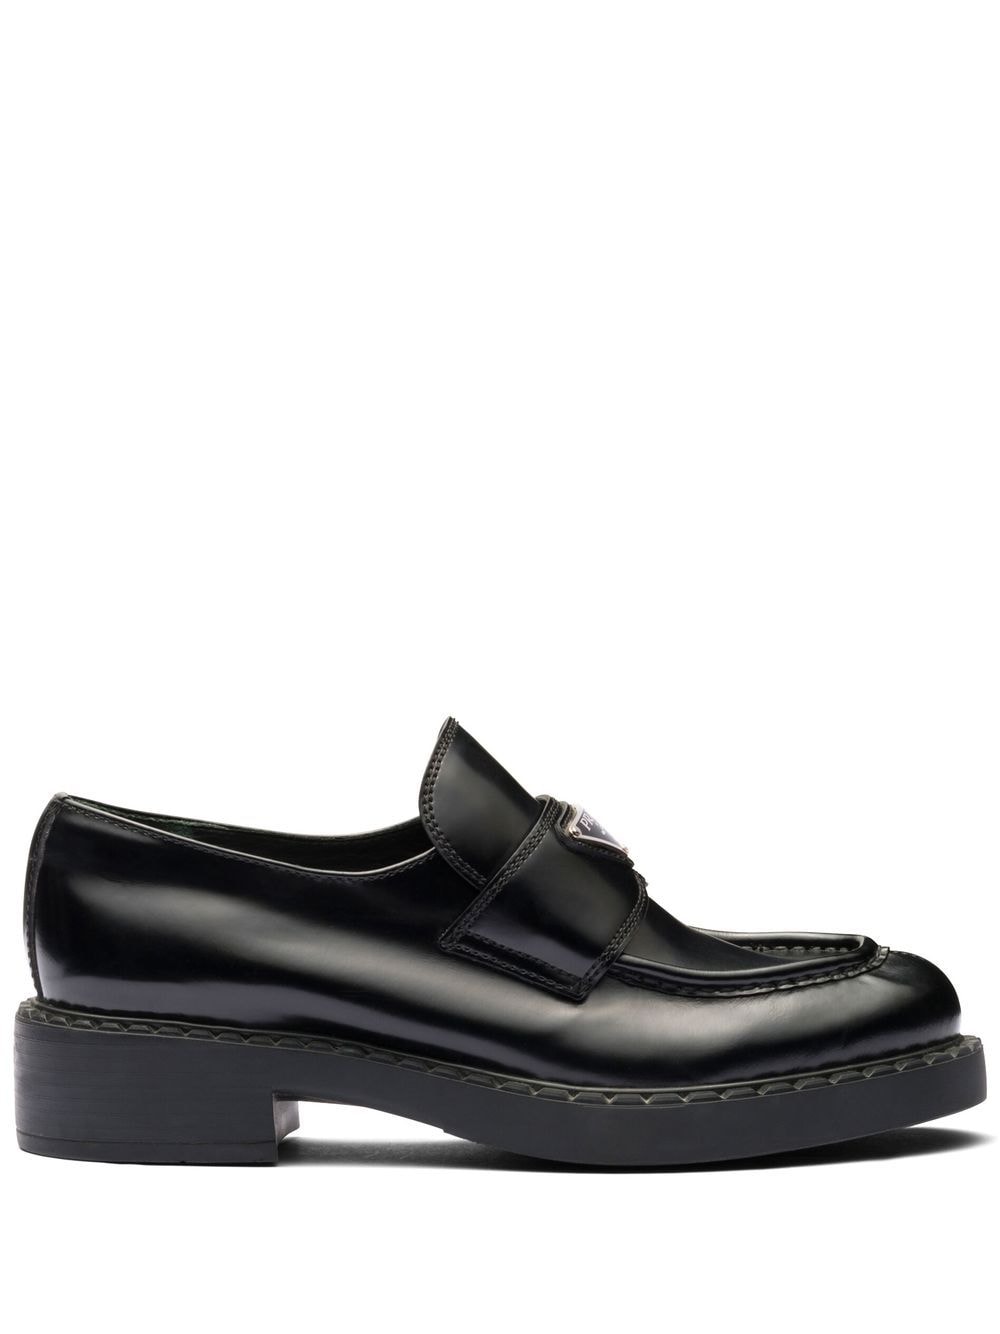 Image 1 of Prada Chocolate brushed leather loafers